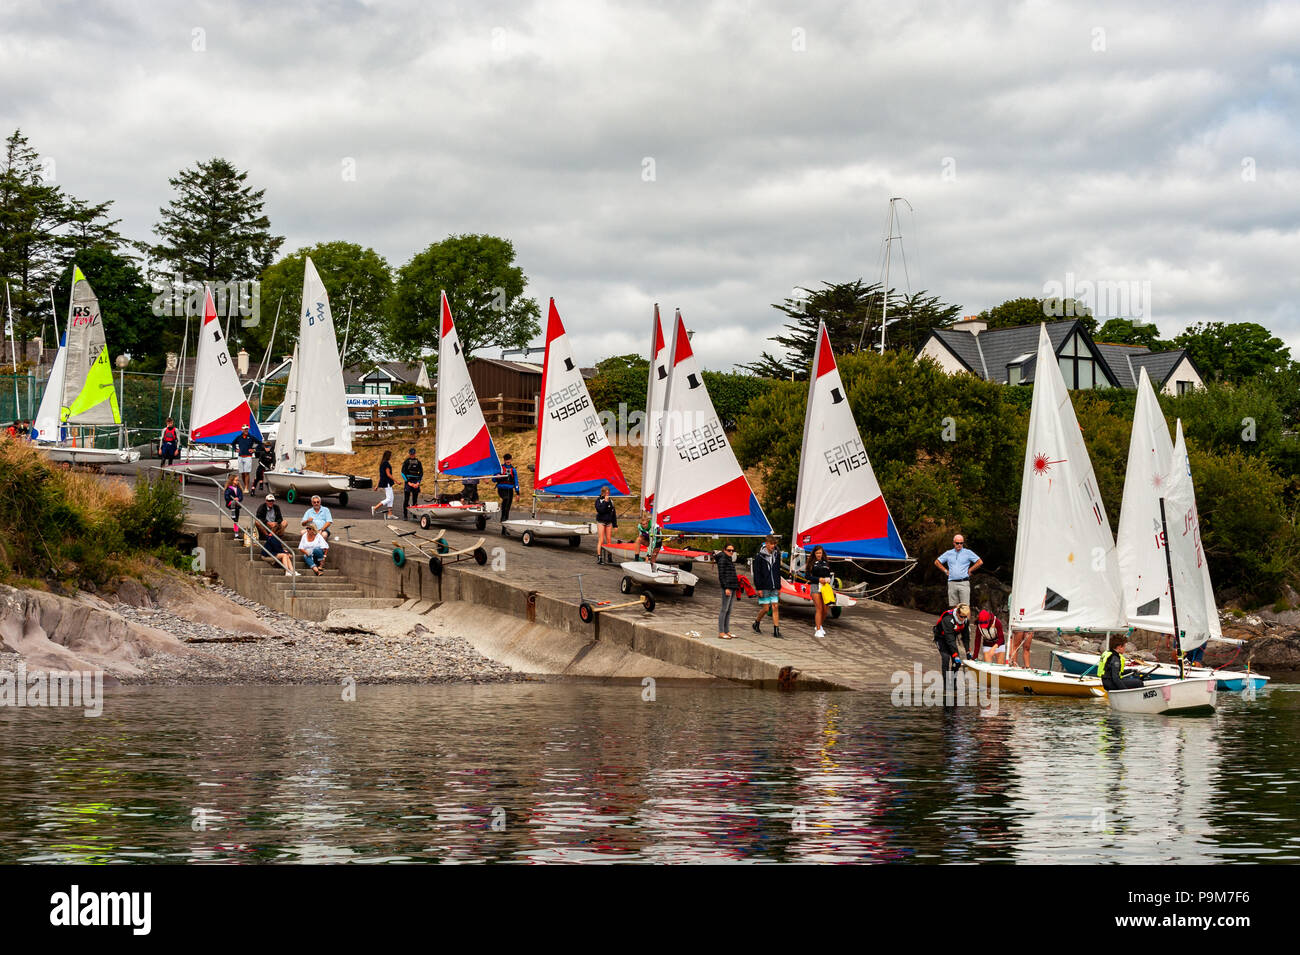 Schull, West Cork, Ireland. 19th July, 2018. Young people come from all over the island of Ireland, including the North, to take part in the schools regatta which is aimed at novice racing sailors. The fleet is pictured launching from the Schull Sailing Centre slipway. Credit: Andy Gibson/Alamy Live News. Stock Photo